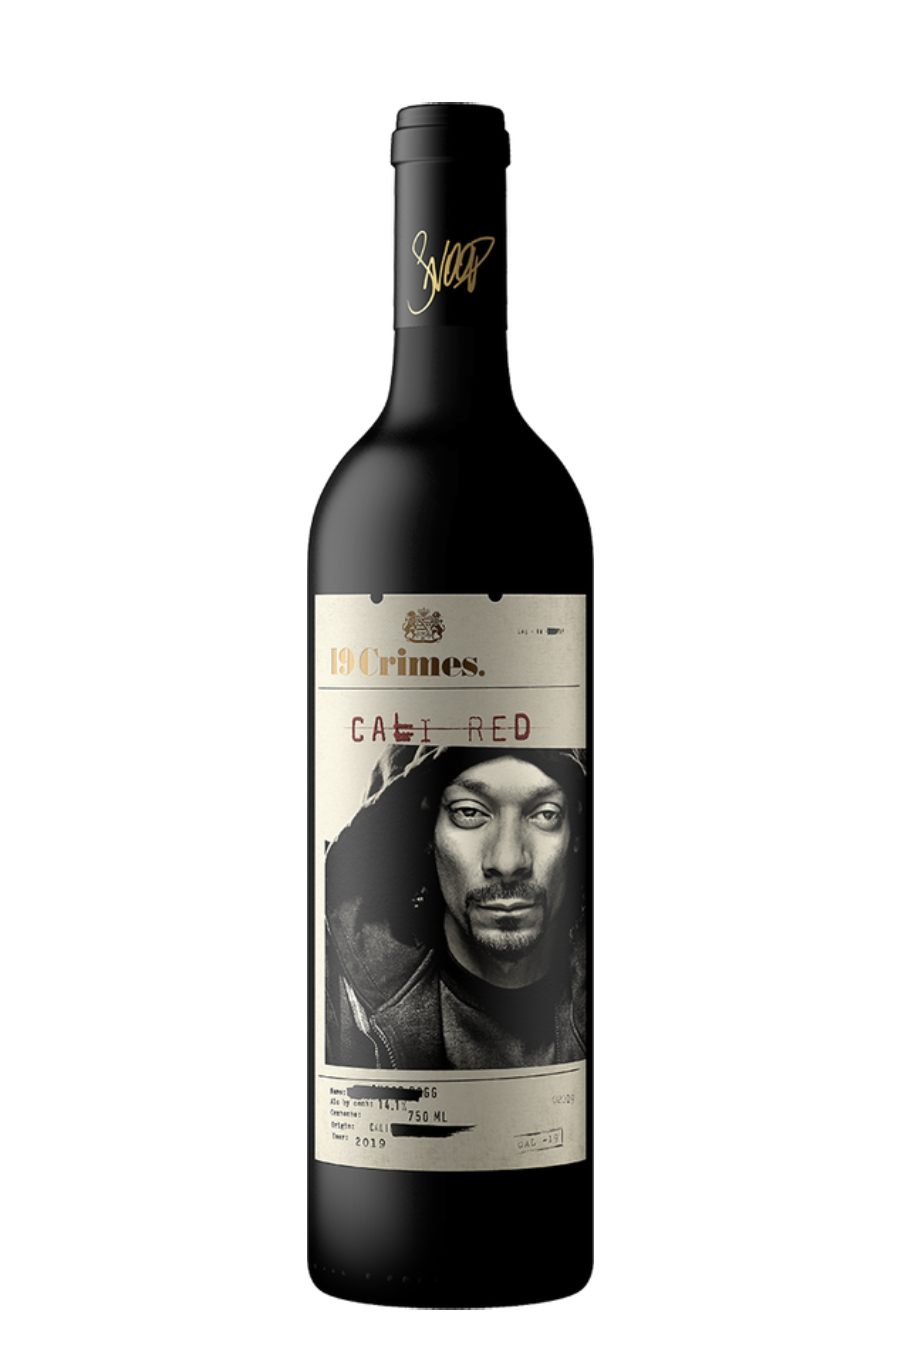 19 Crimes Cali Red Wine by Snoop | A Smooth Bold | BuyWinesOnline